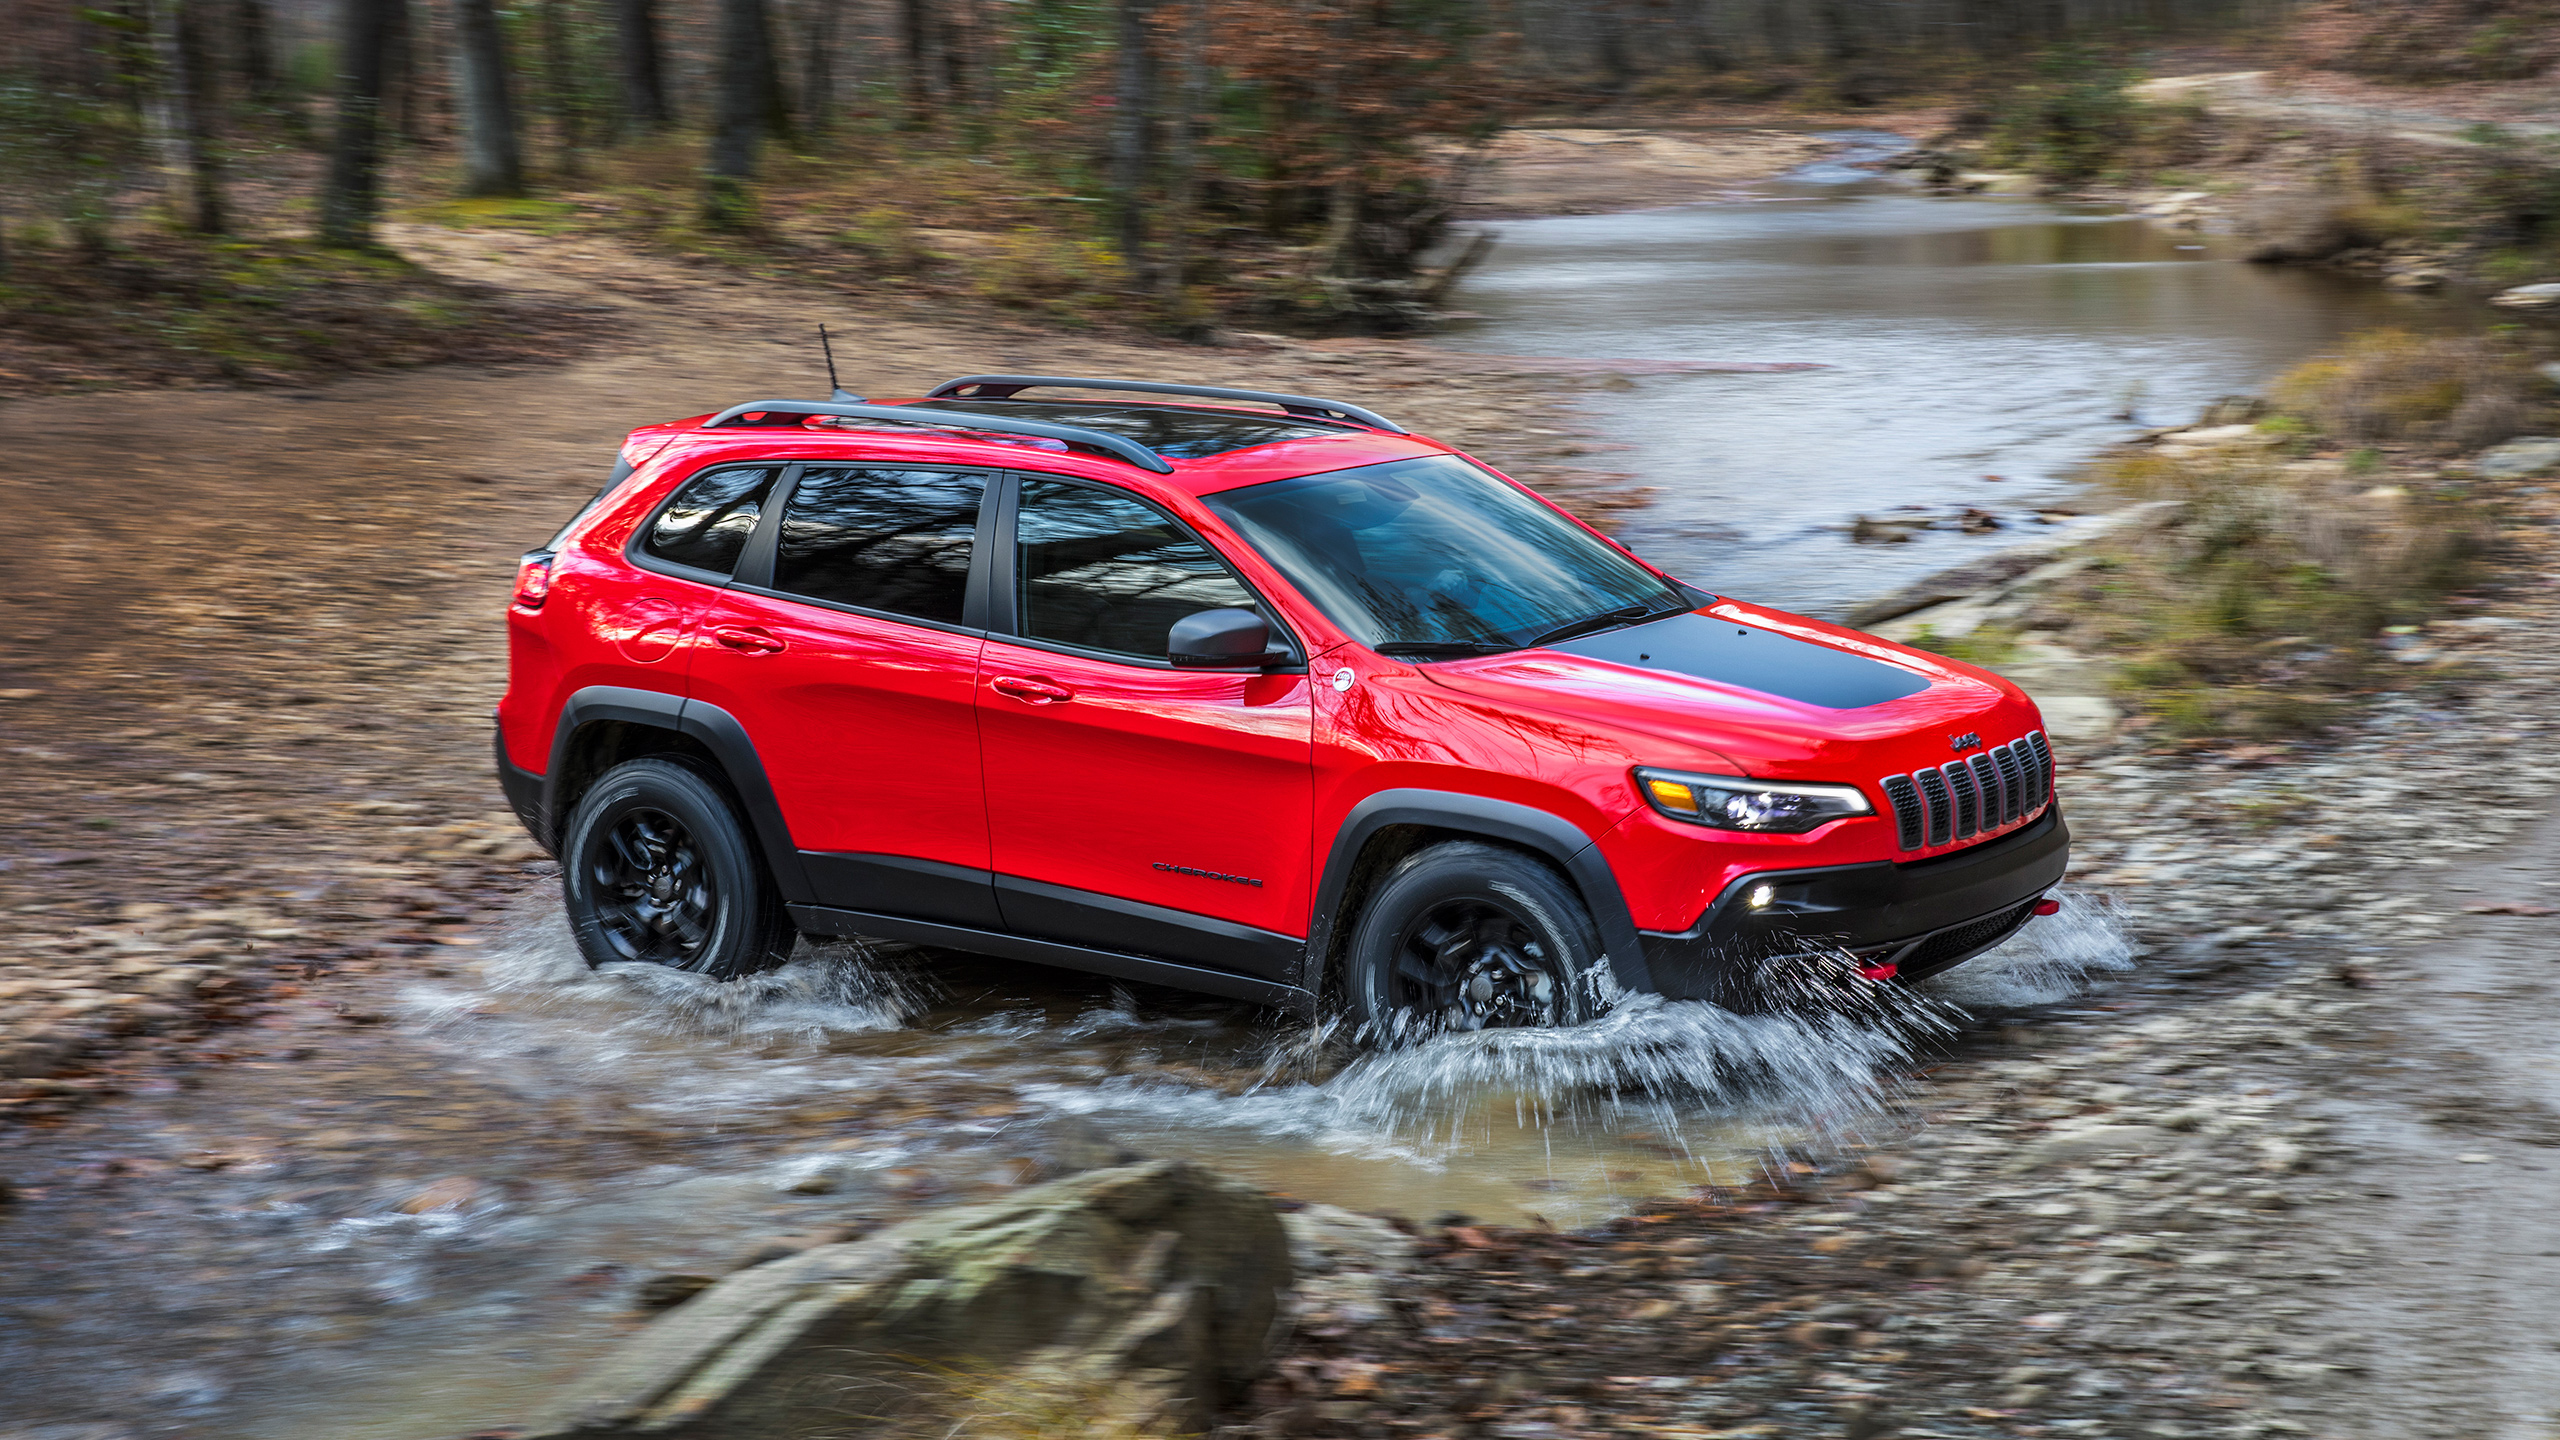 7. 2014 Jeep Cherokee Trailhawk for sale on Craigslist - wide 2